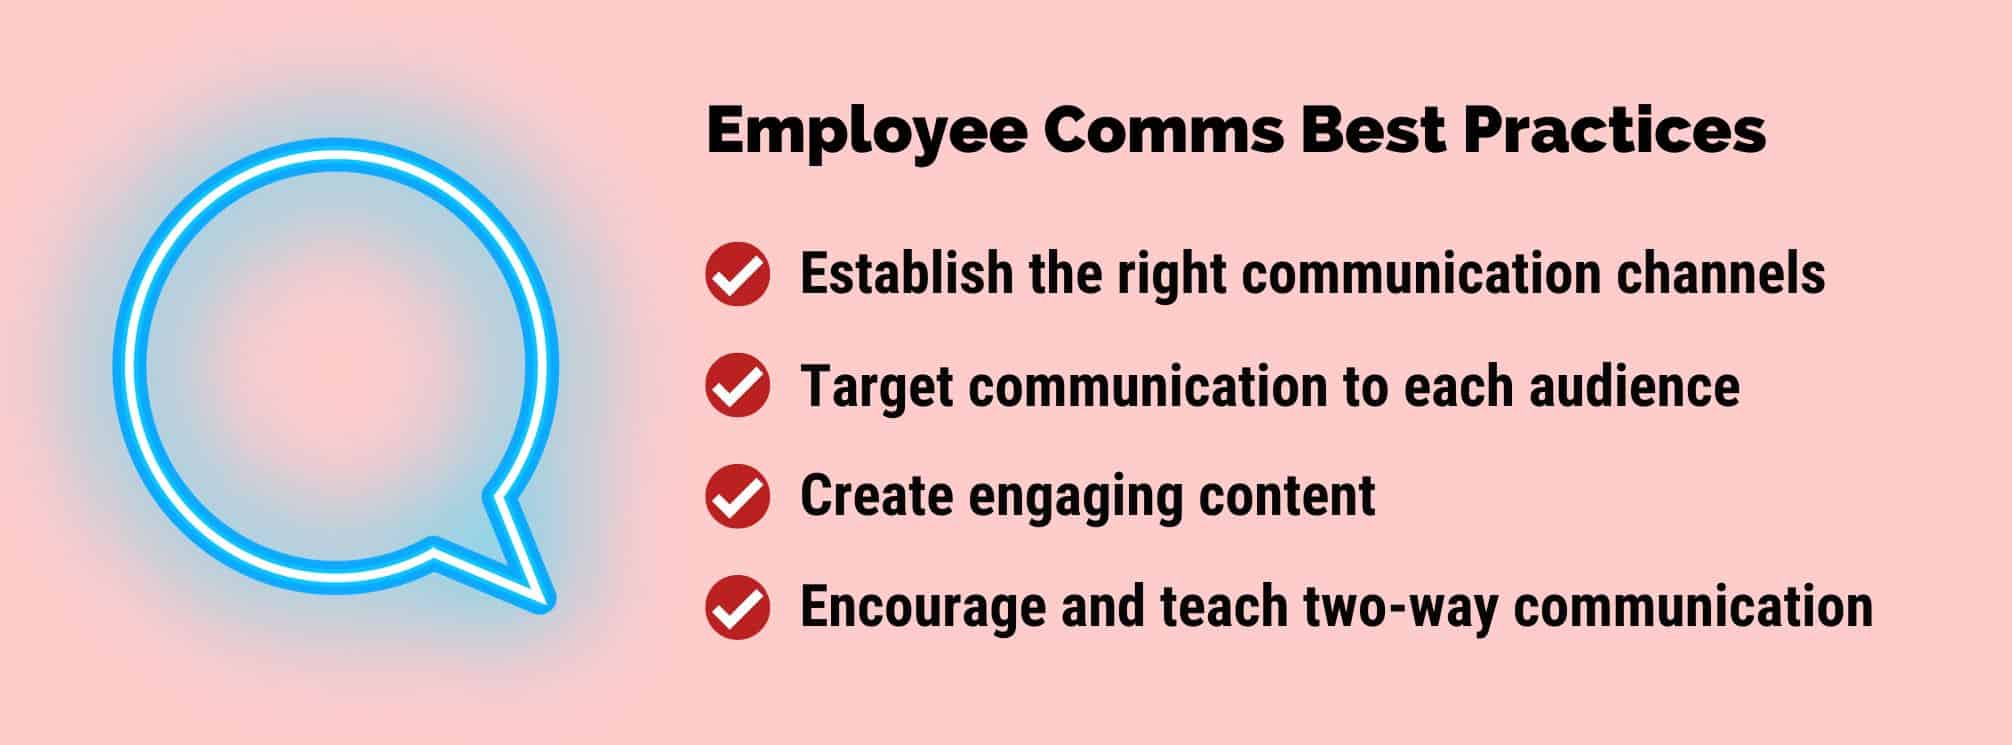 text-based graphic that says "employee comms best practices" and lists out the top 4.